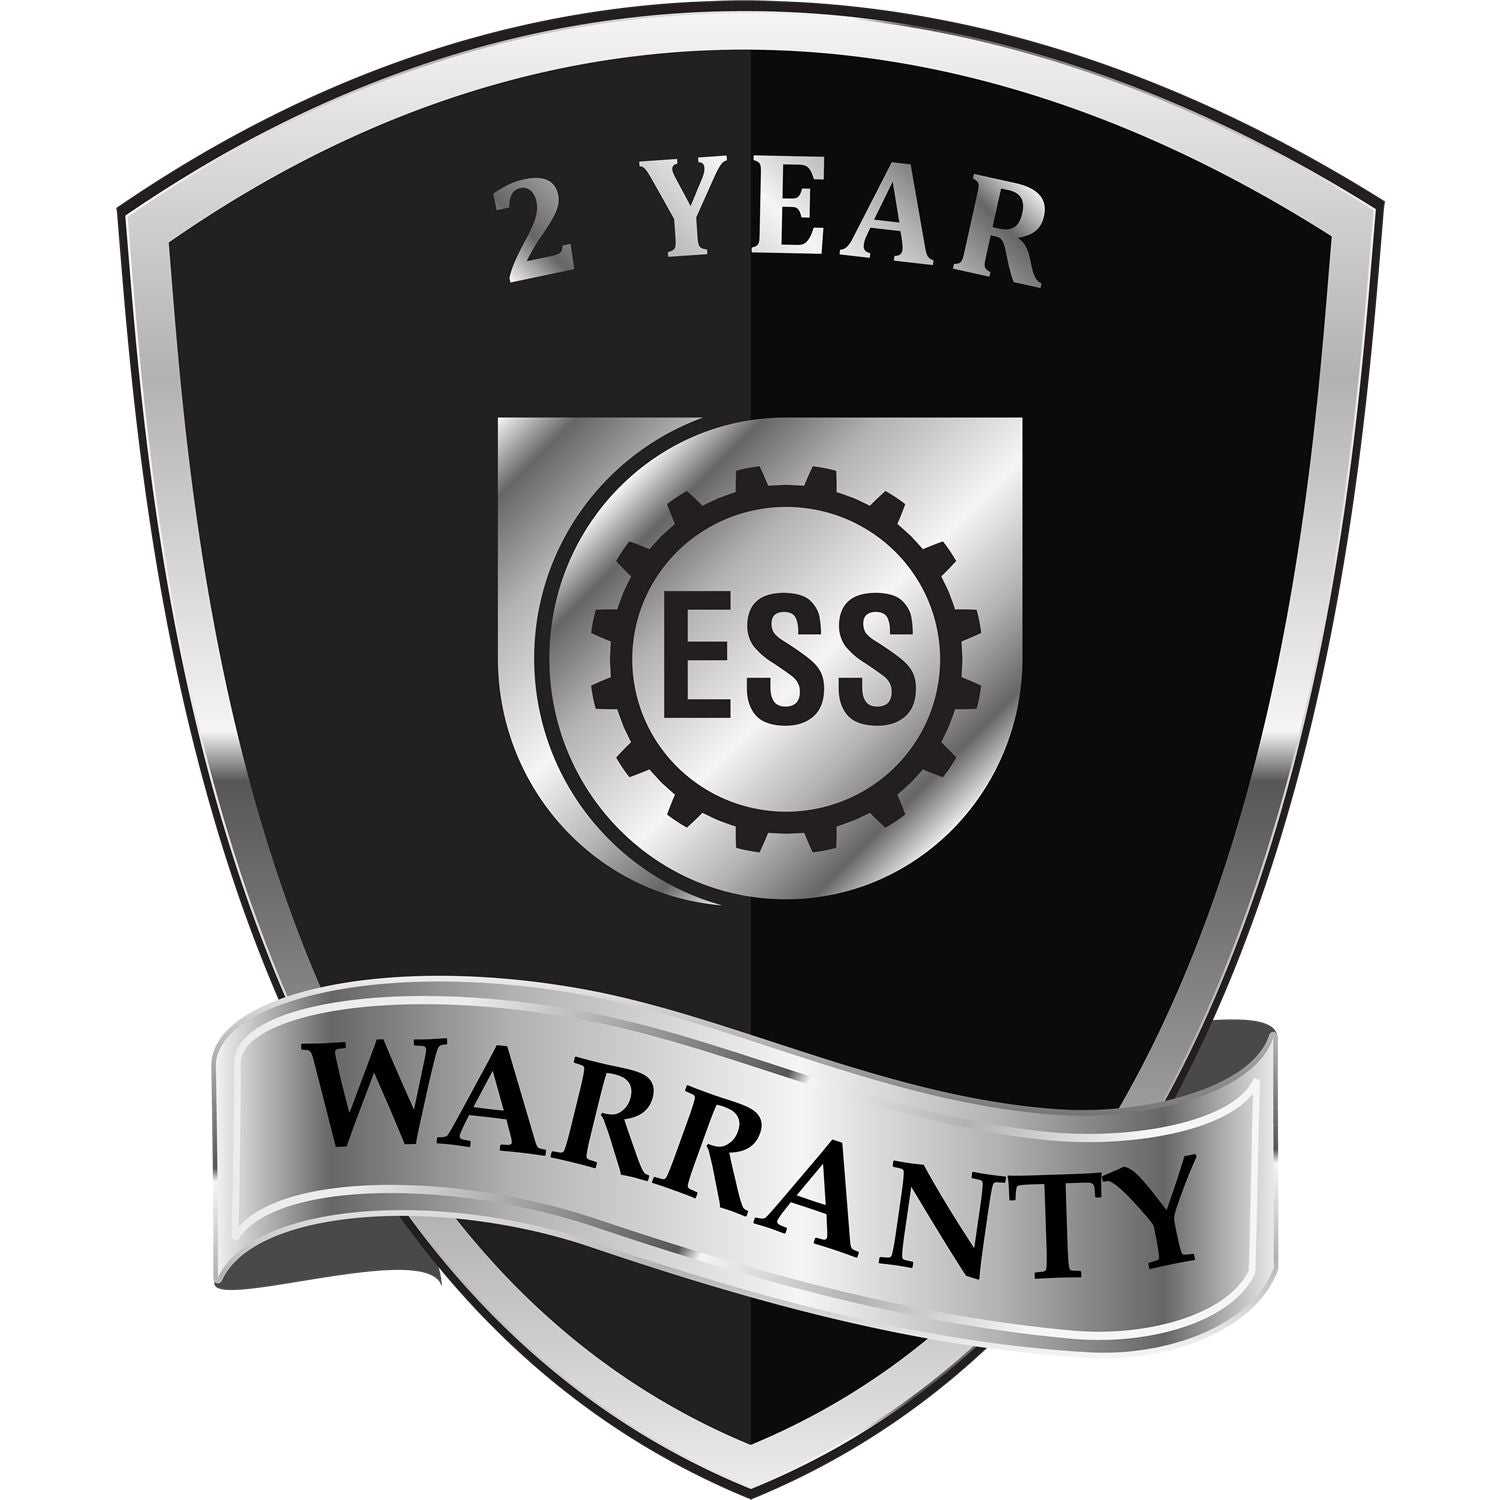 A black and silver badge or emblem showing warranty information for the Gift Arkansas Architect Seal